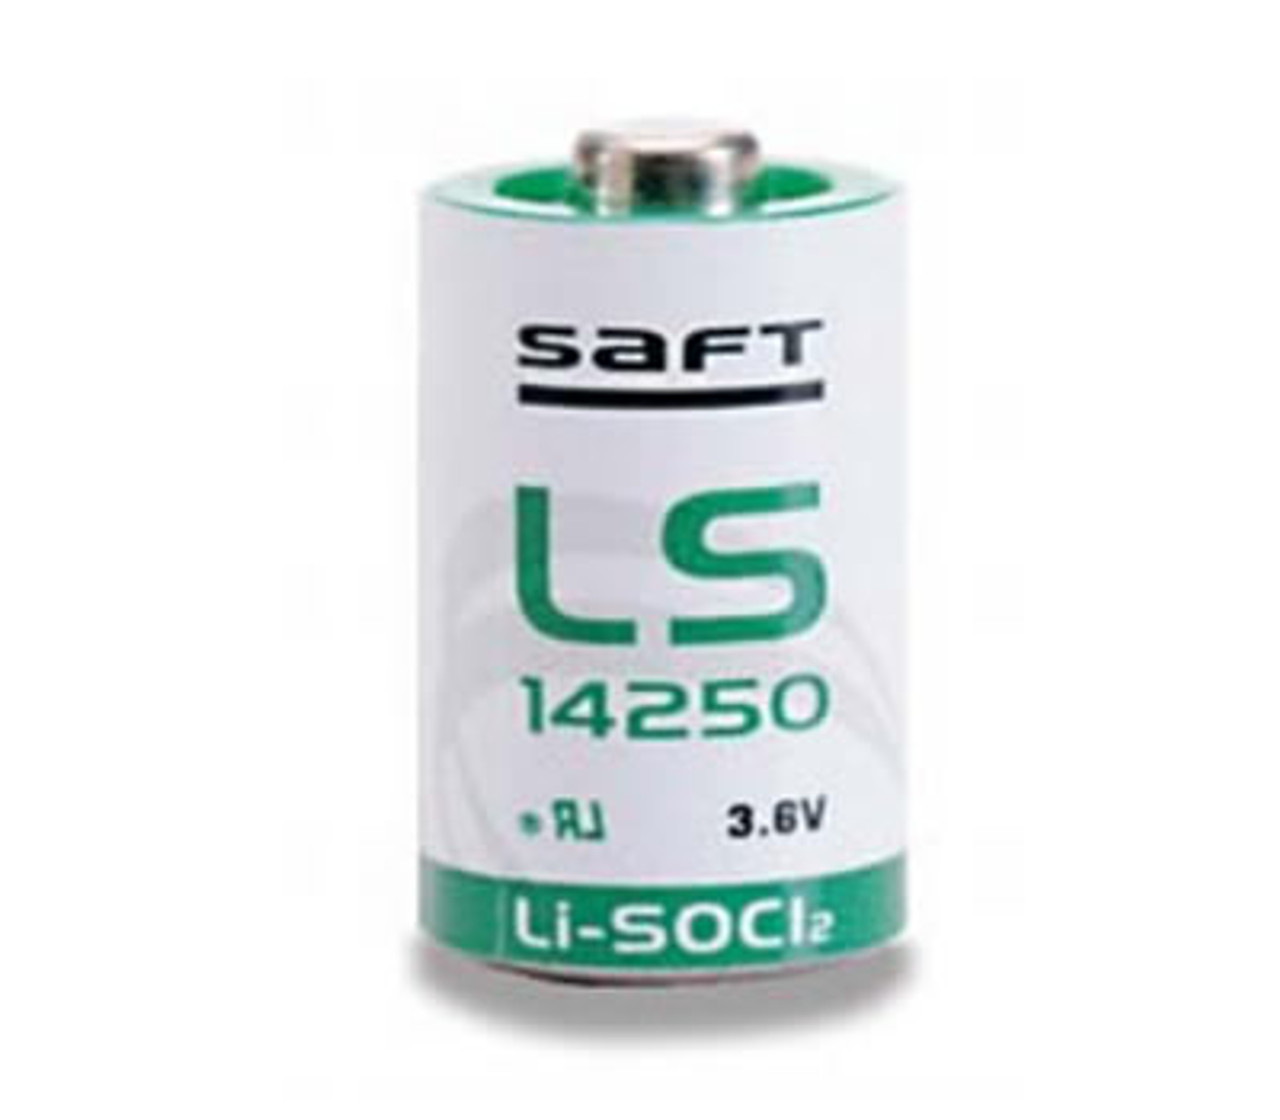 Saft LS14250 Battery (50 Pieces) 1/2 AA Lithium